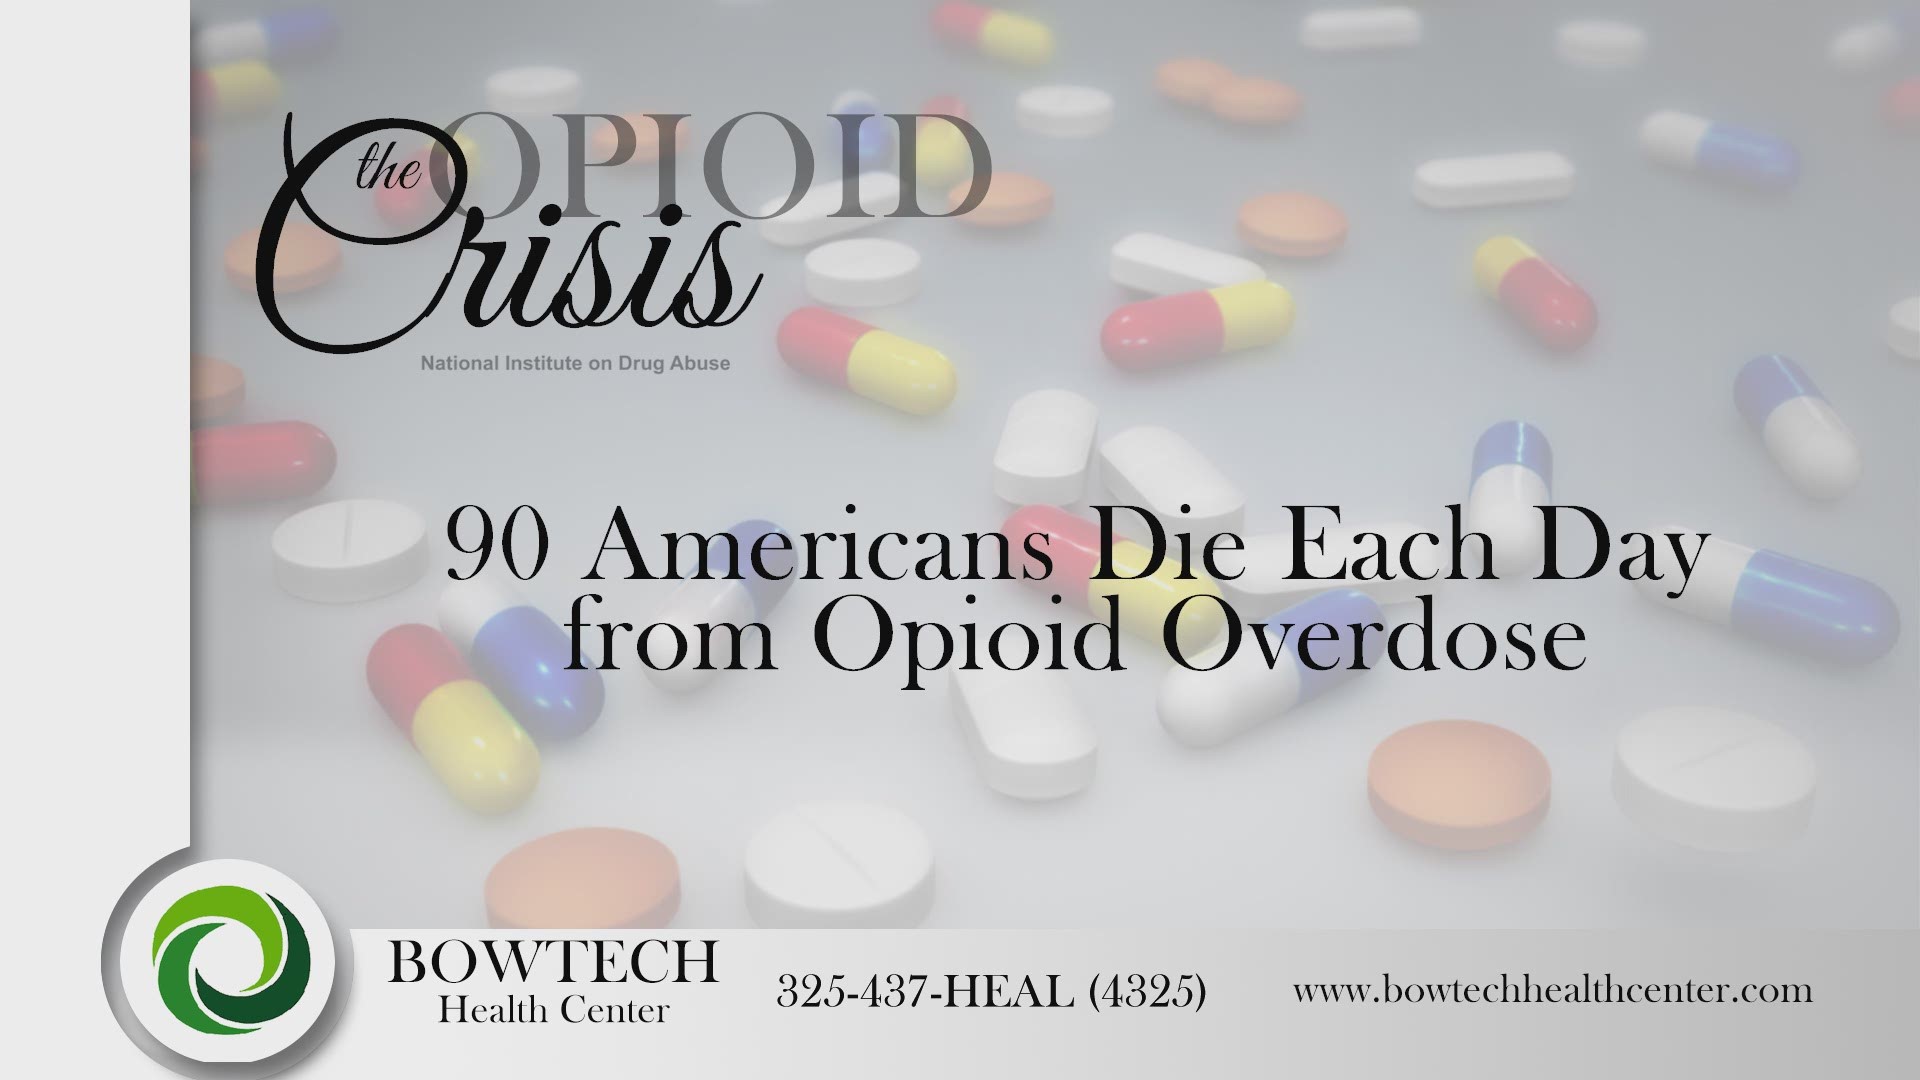 Bowtech - The Opiod Crisis and treating chronic pain